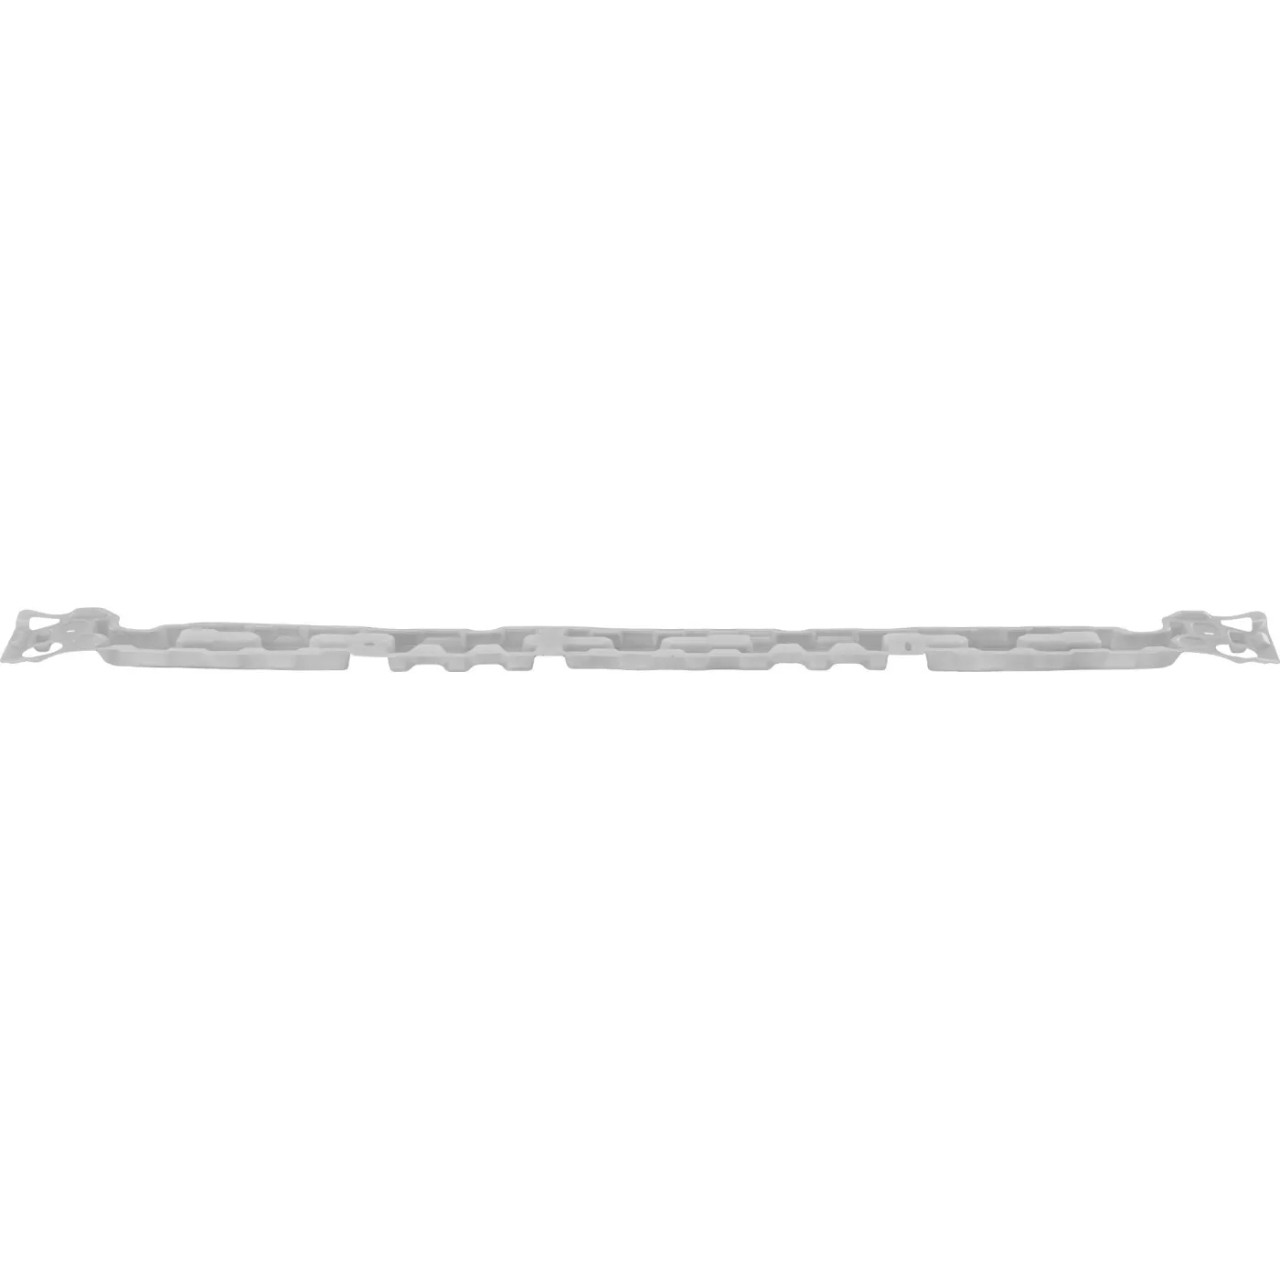 Bumper Face Bar Impact Absorber Rear for Town and Country  5113105AB Dodge &